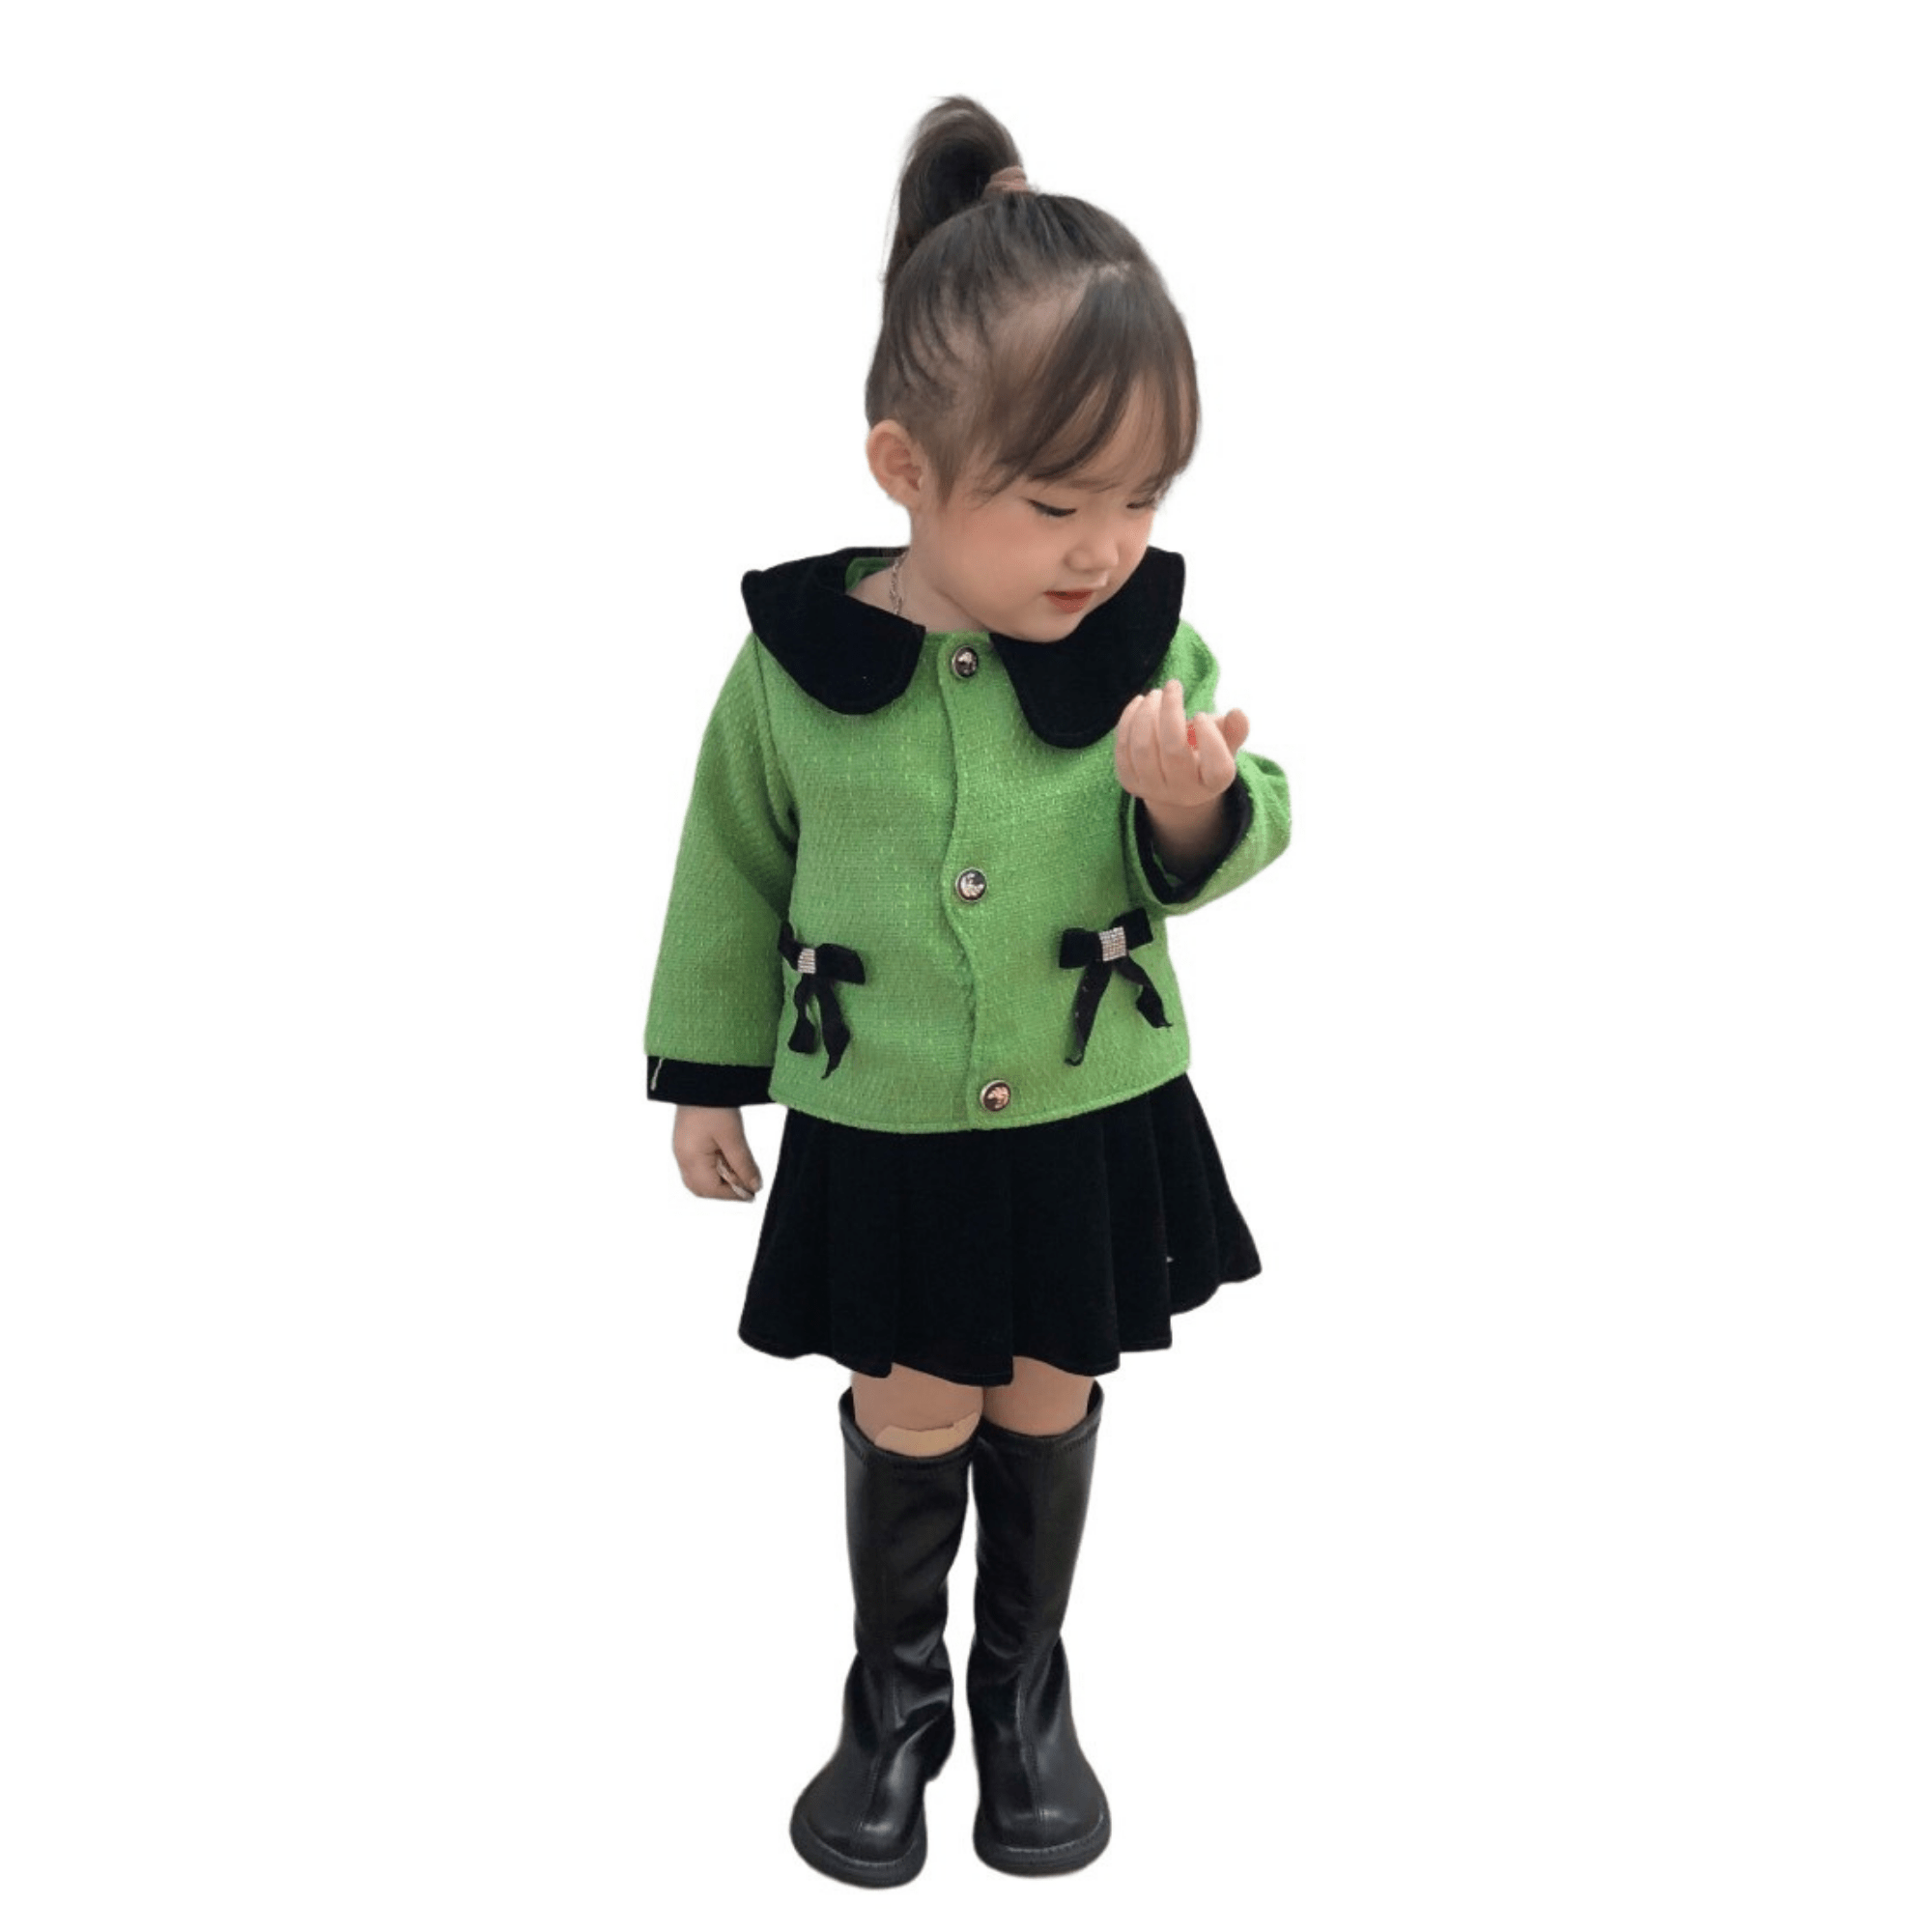 Winter Clothes For Kids Reasonable Price 100% Wool Dresses Casual Each One In Opp Bag Vietnam Manufacturer 5